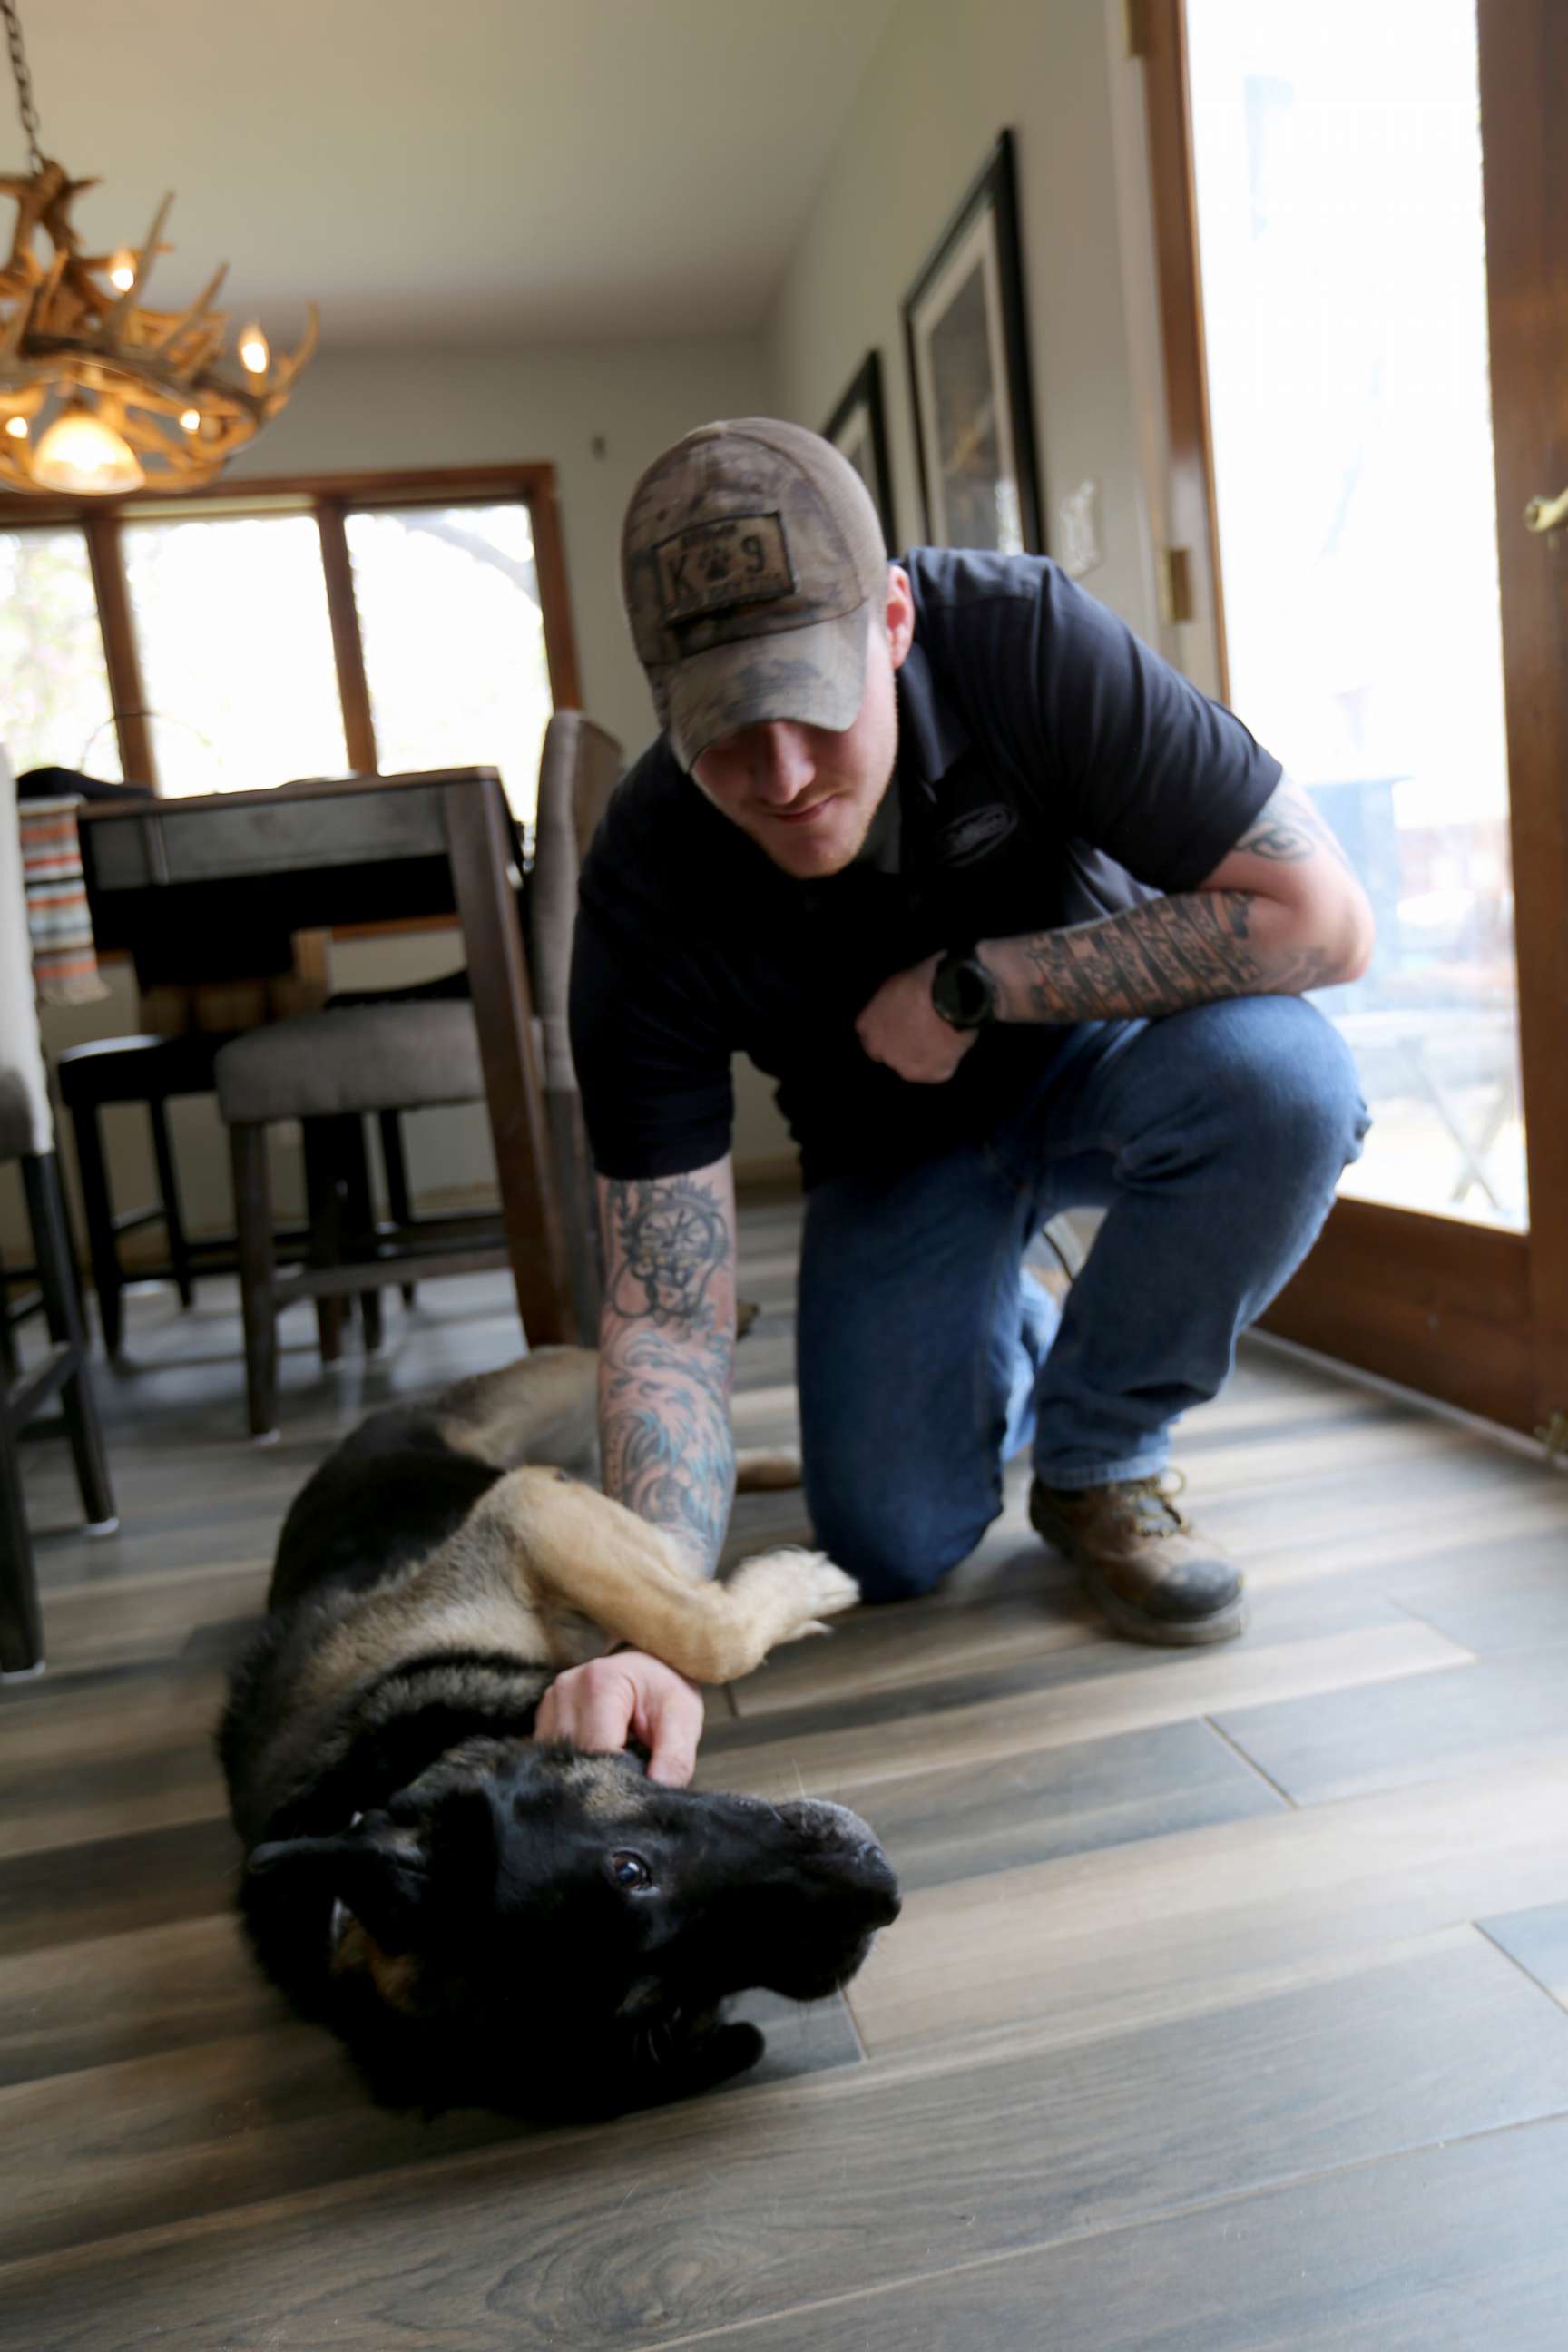 PHOTO: Sgt. Wess Brown (U.S. Army) pictured with Isky Brown at home in Catlett, VA.